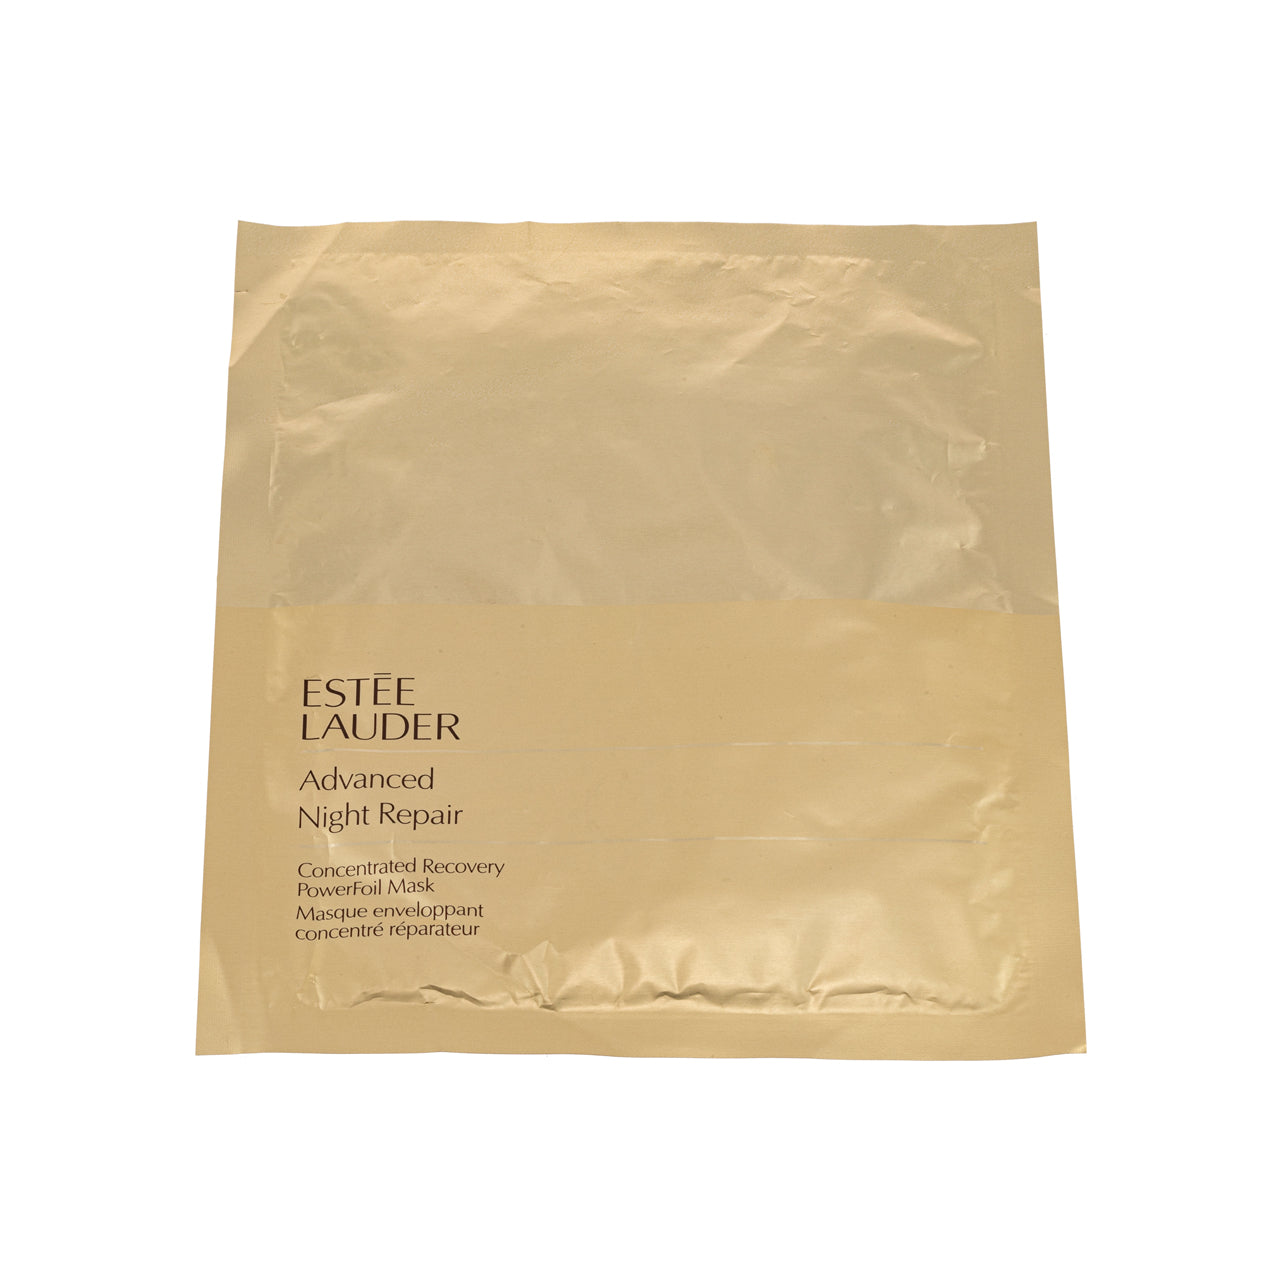 Estee Lauder Advanced Night Repair Concentrated Recovery Powerfoil Mask 1PCS